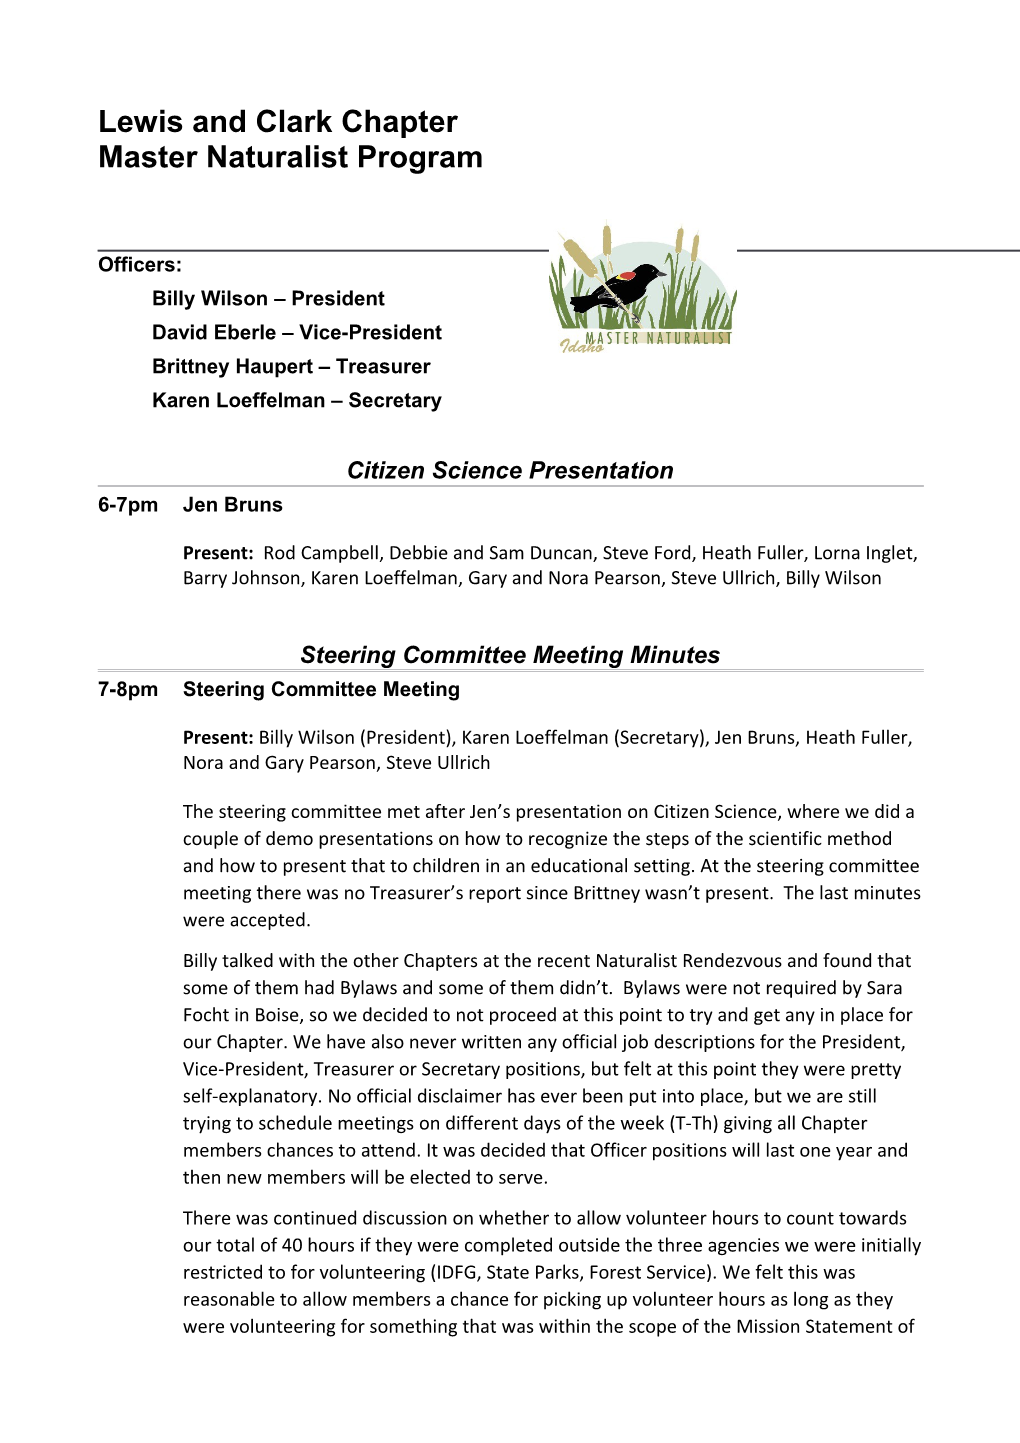 Idaho Master Naturalist Lewis and Clark Chapter Steering Committee Meeting Minutes, 10-21-2015